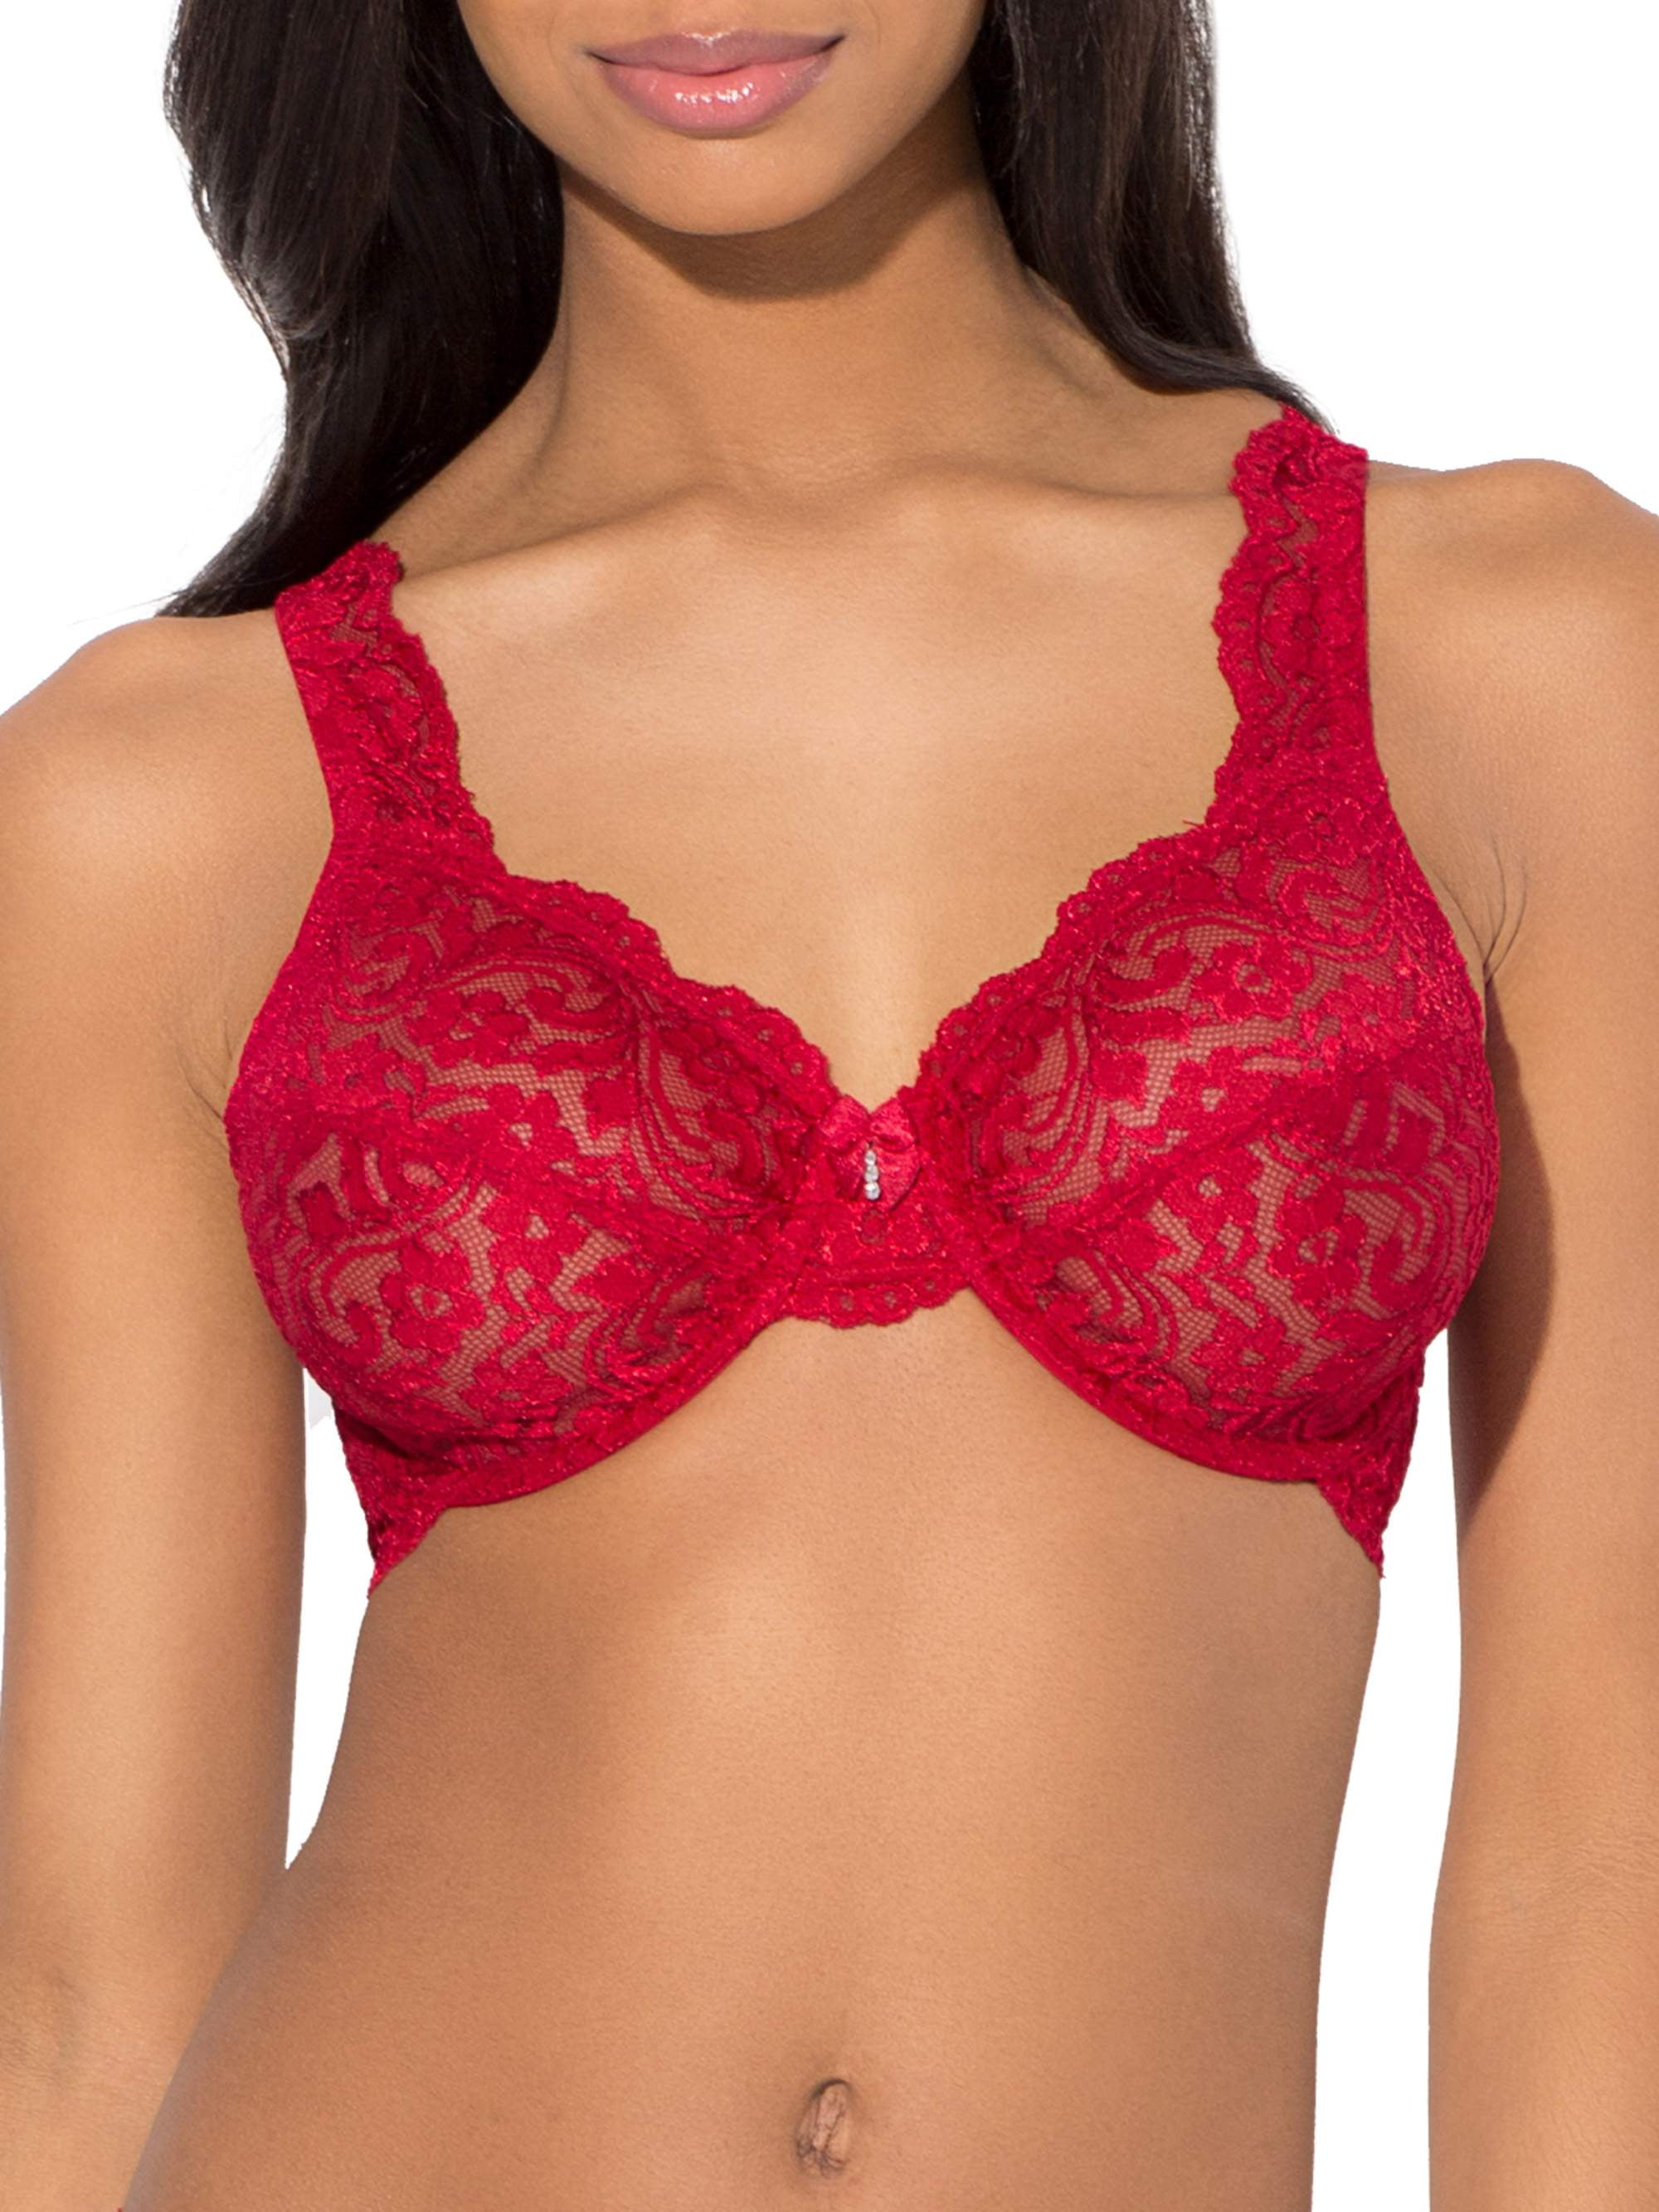 Smart & Sexy Women's Signature Lace Unlined Underwire Bra, Available in  Single and 2 Packs